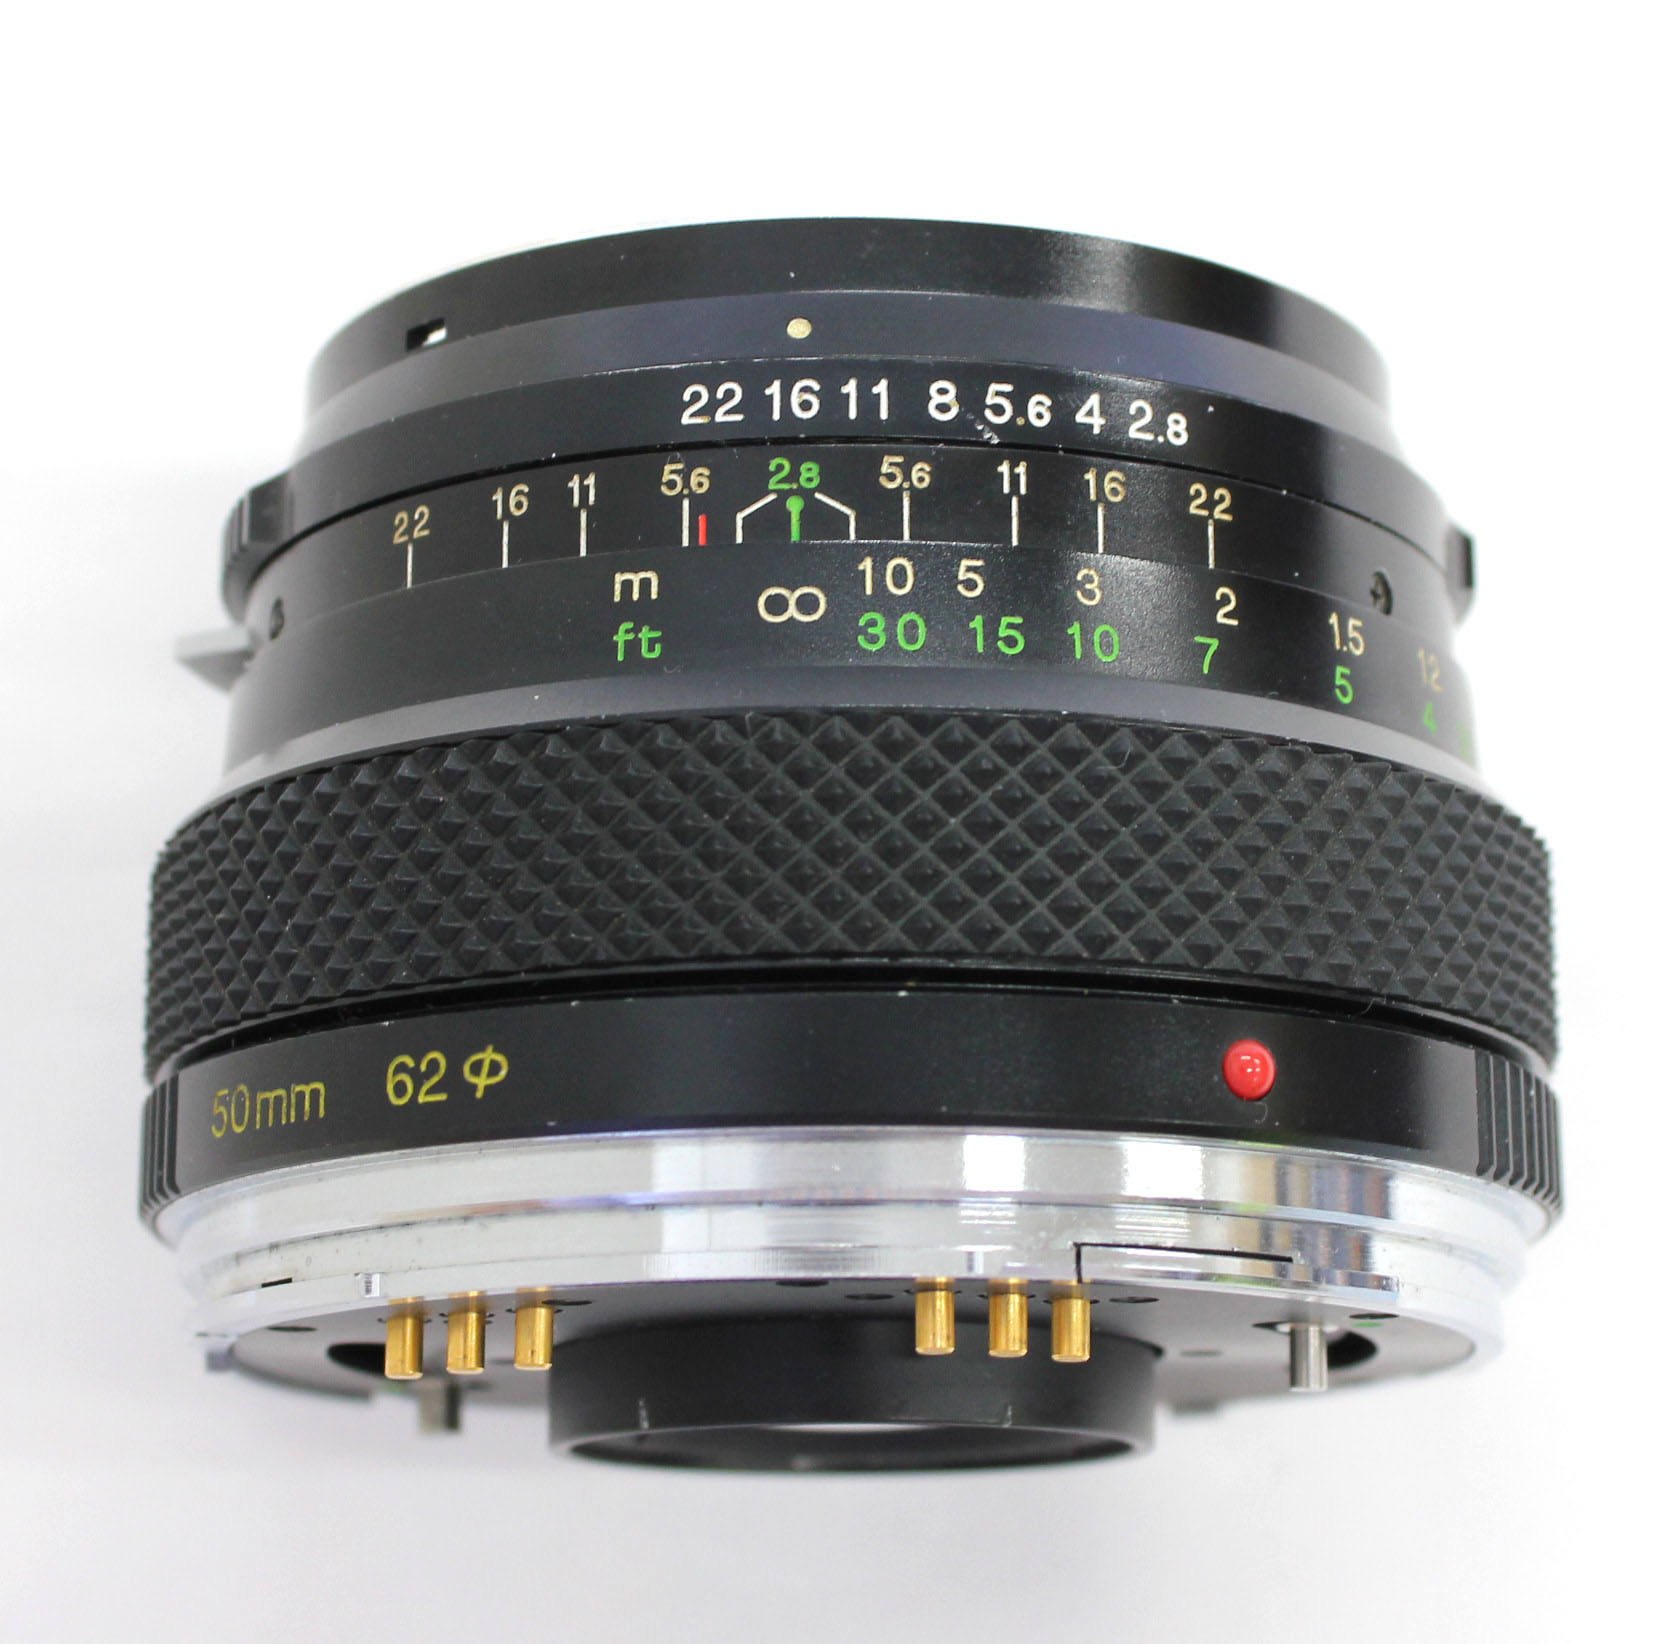 Zenza Bronica Zenzanon MC 50mm F/2.8 Lens for ETR S Si from Japan Photo 2